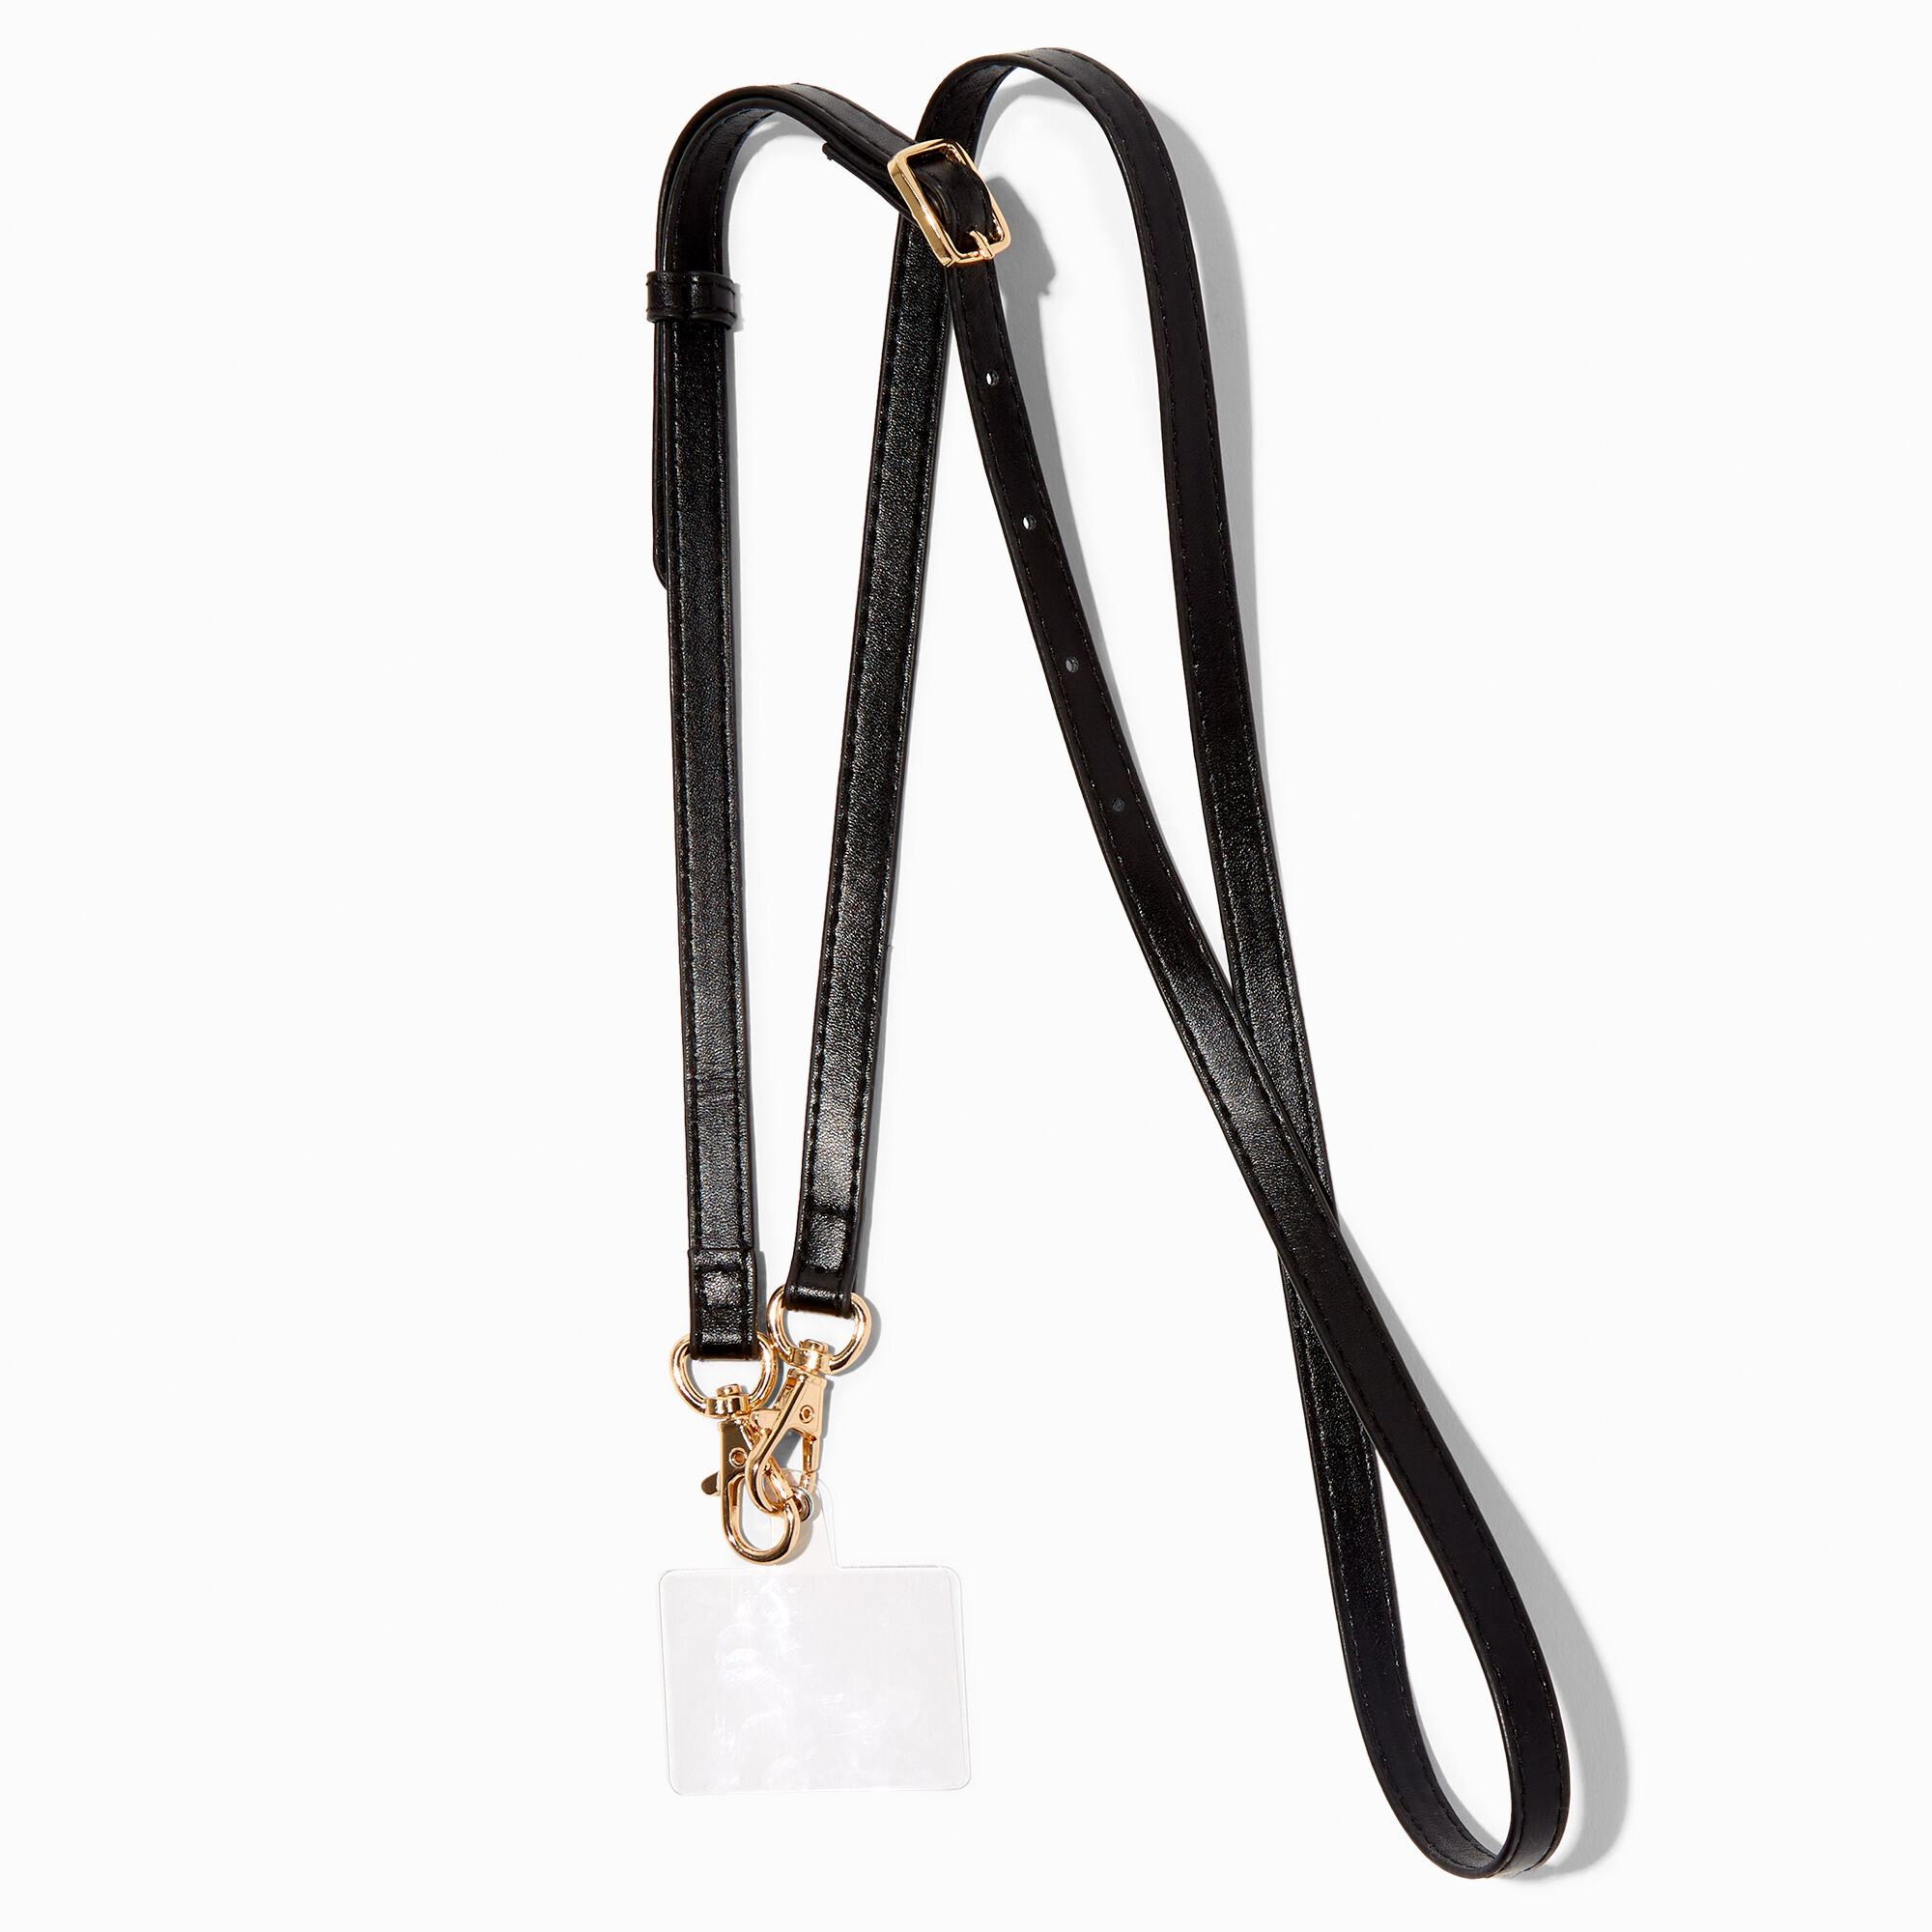 View Claires Faux Leather Crossbody Phone Strap Black information